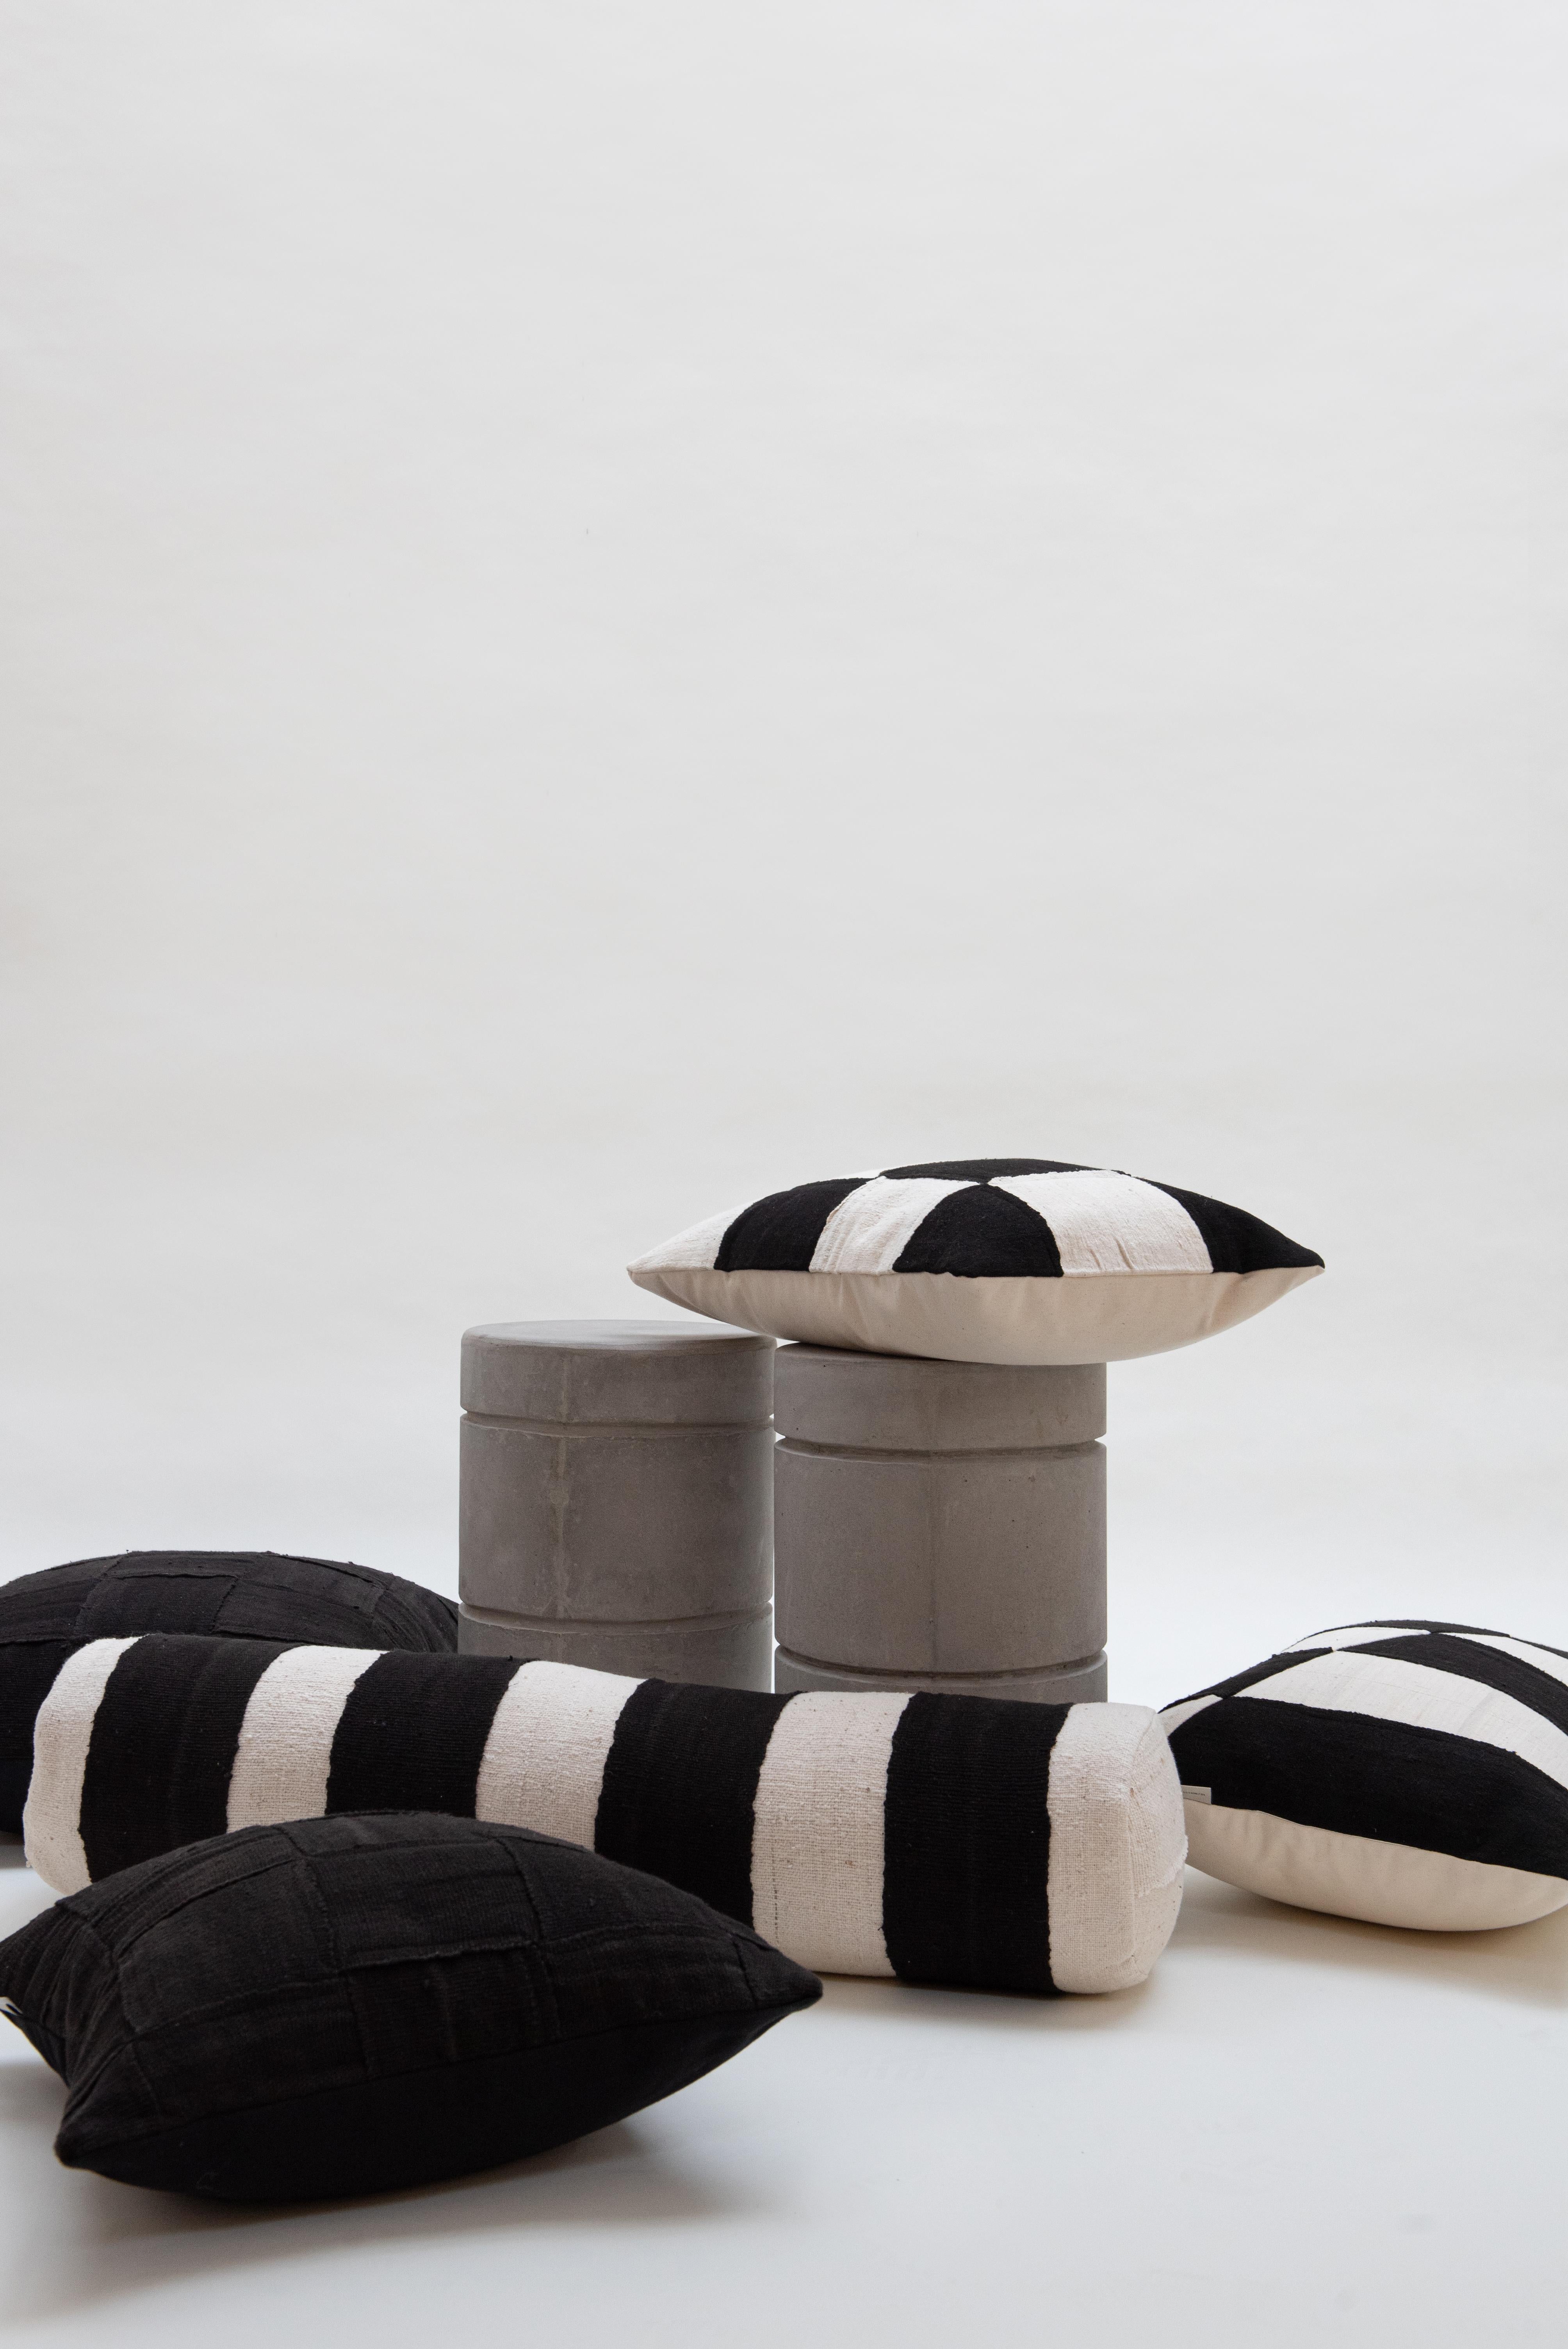 Contemporary Black & White Handwoven Cushion / Bolster for on Your Bed or Sofa In New Condition For Sale In Amsterdam, NL